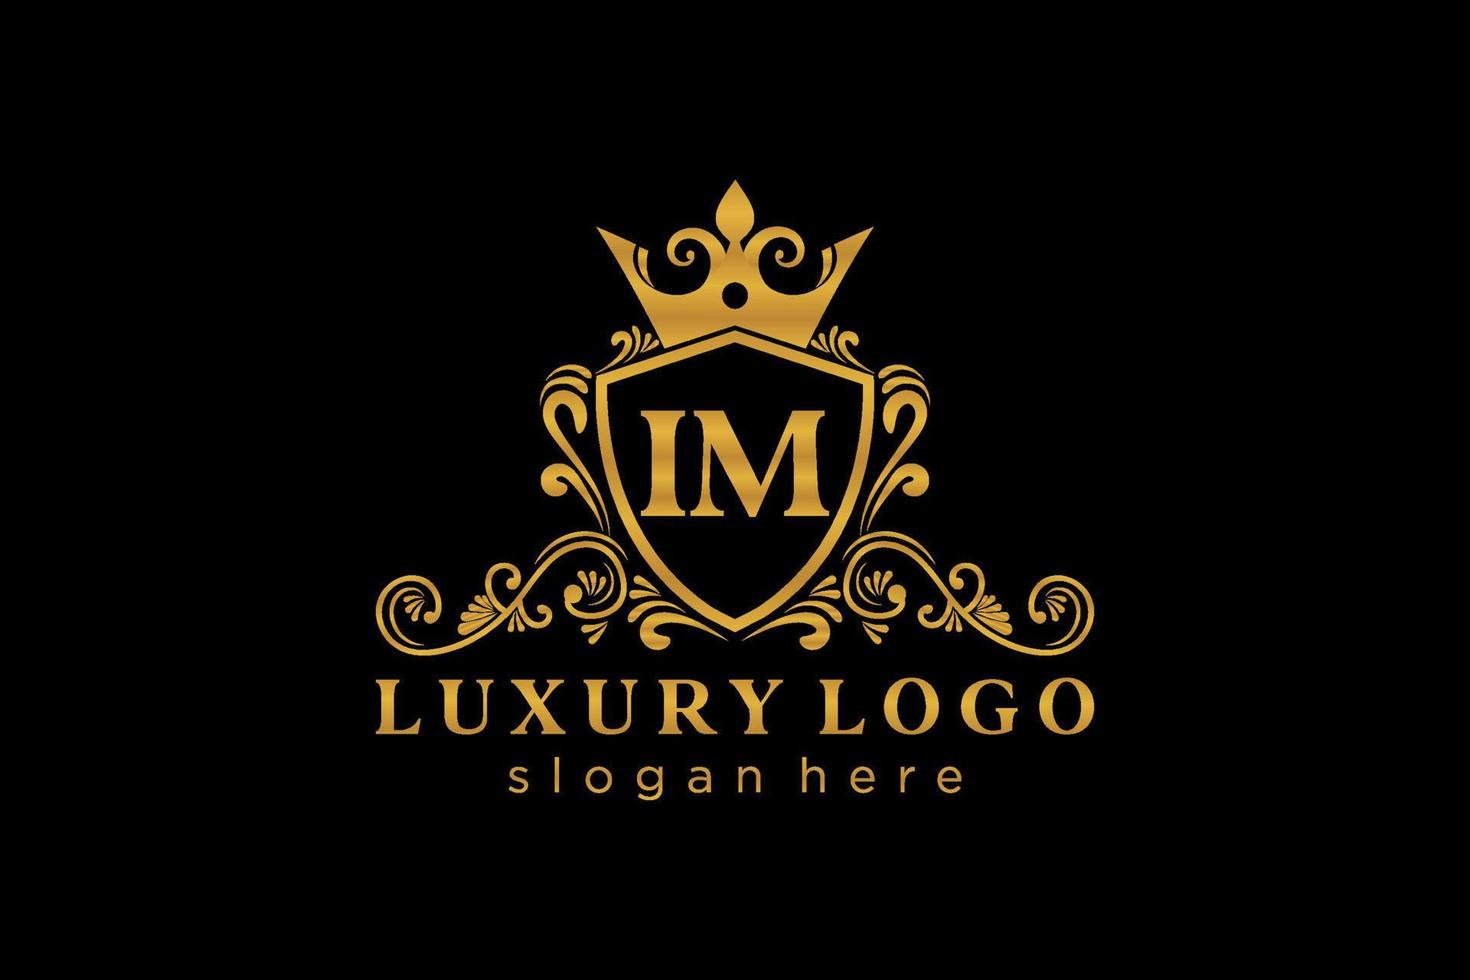 Initial IM Letter Royal Luxury Logo template in vector art for Restaurant, Royalty, Boutique, Cafe, Hotel, Heraldic, Jewelry, Fashion and other vector illustration.